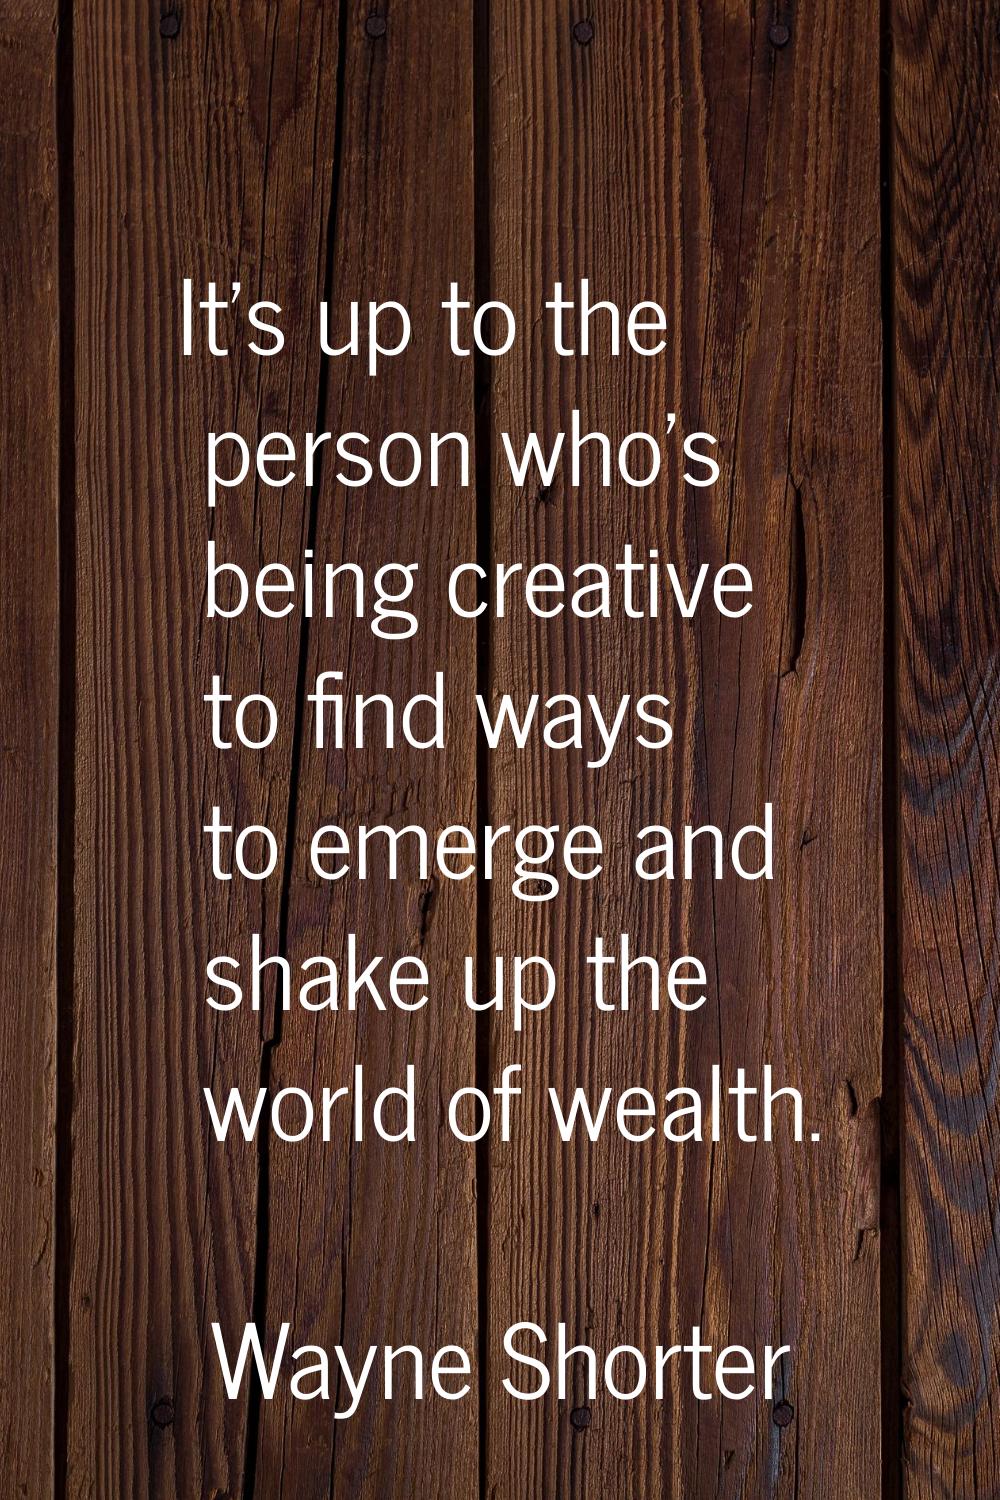 It's up to the person who's being creative to find ways to emerge and shake up the world of wealth.